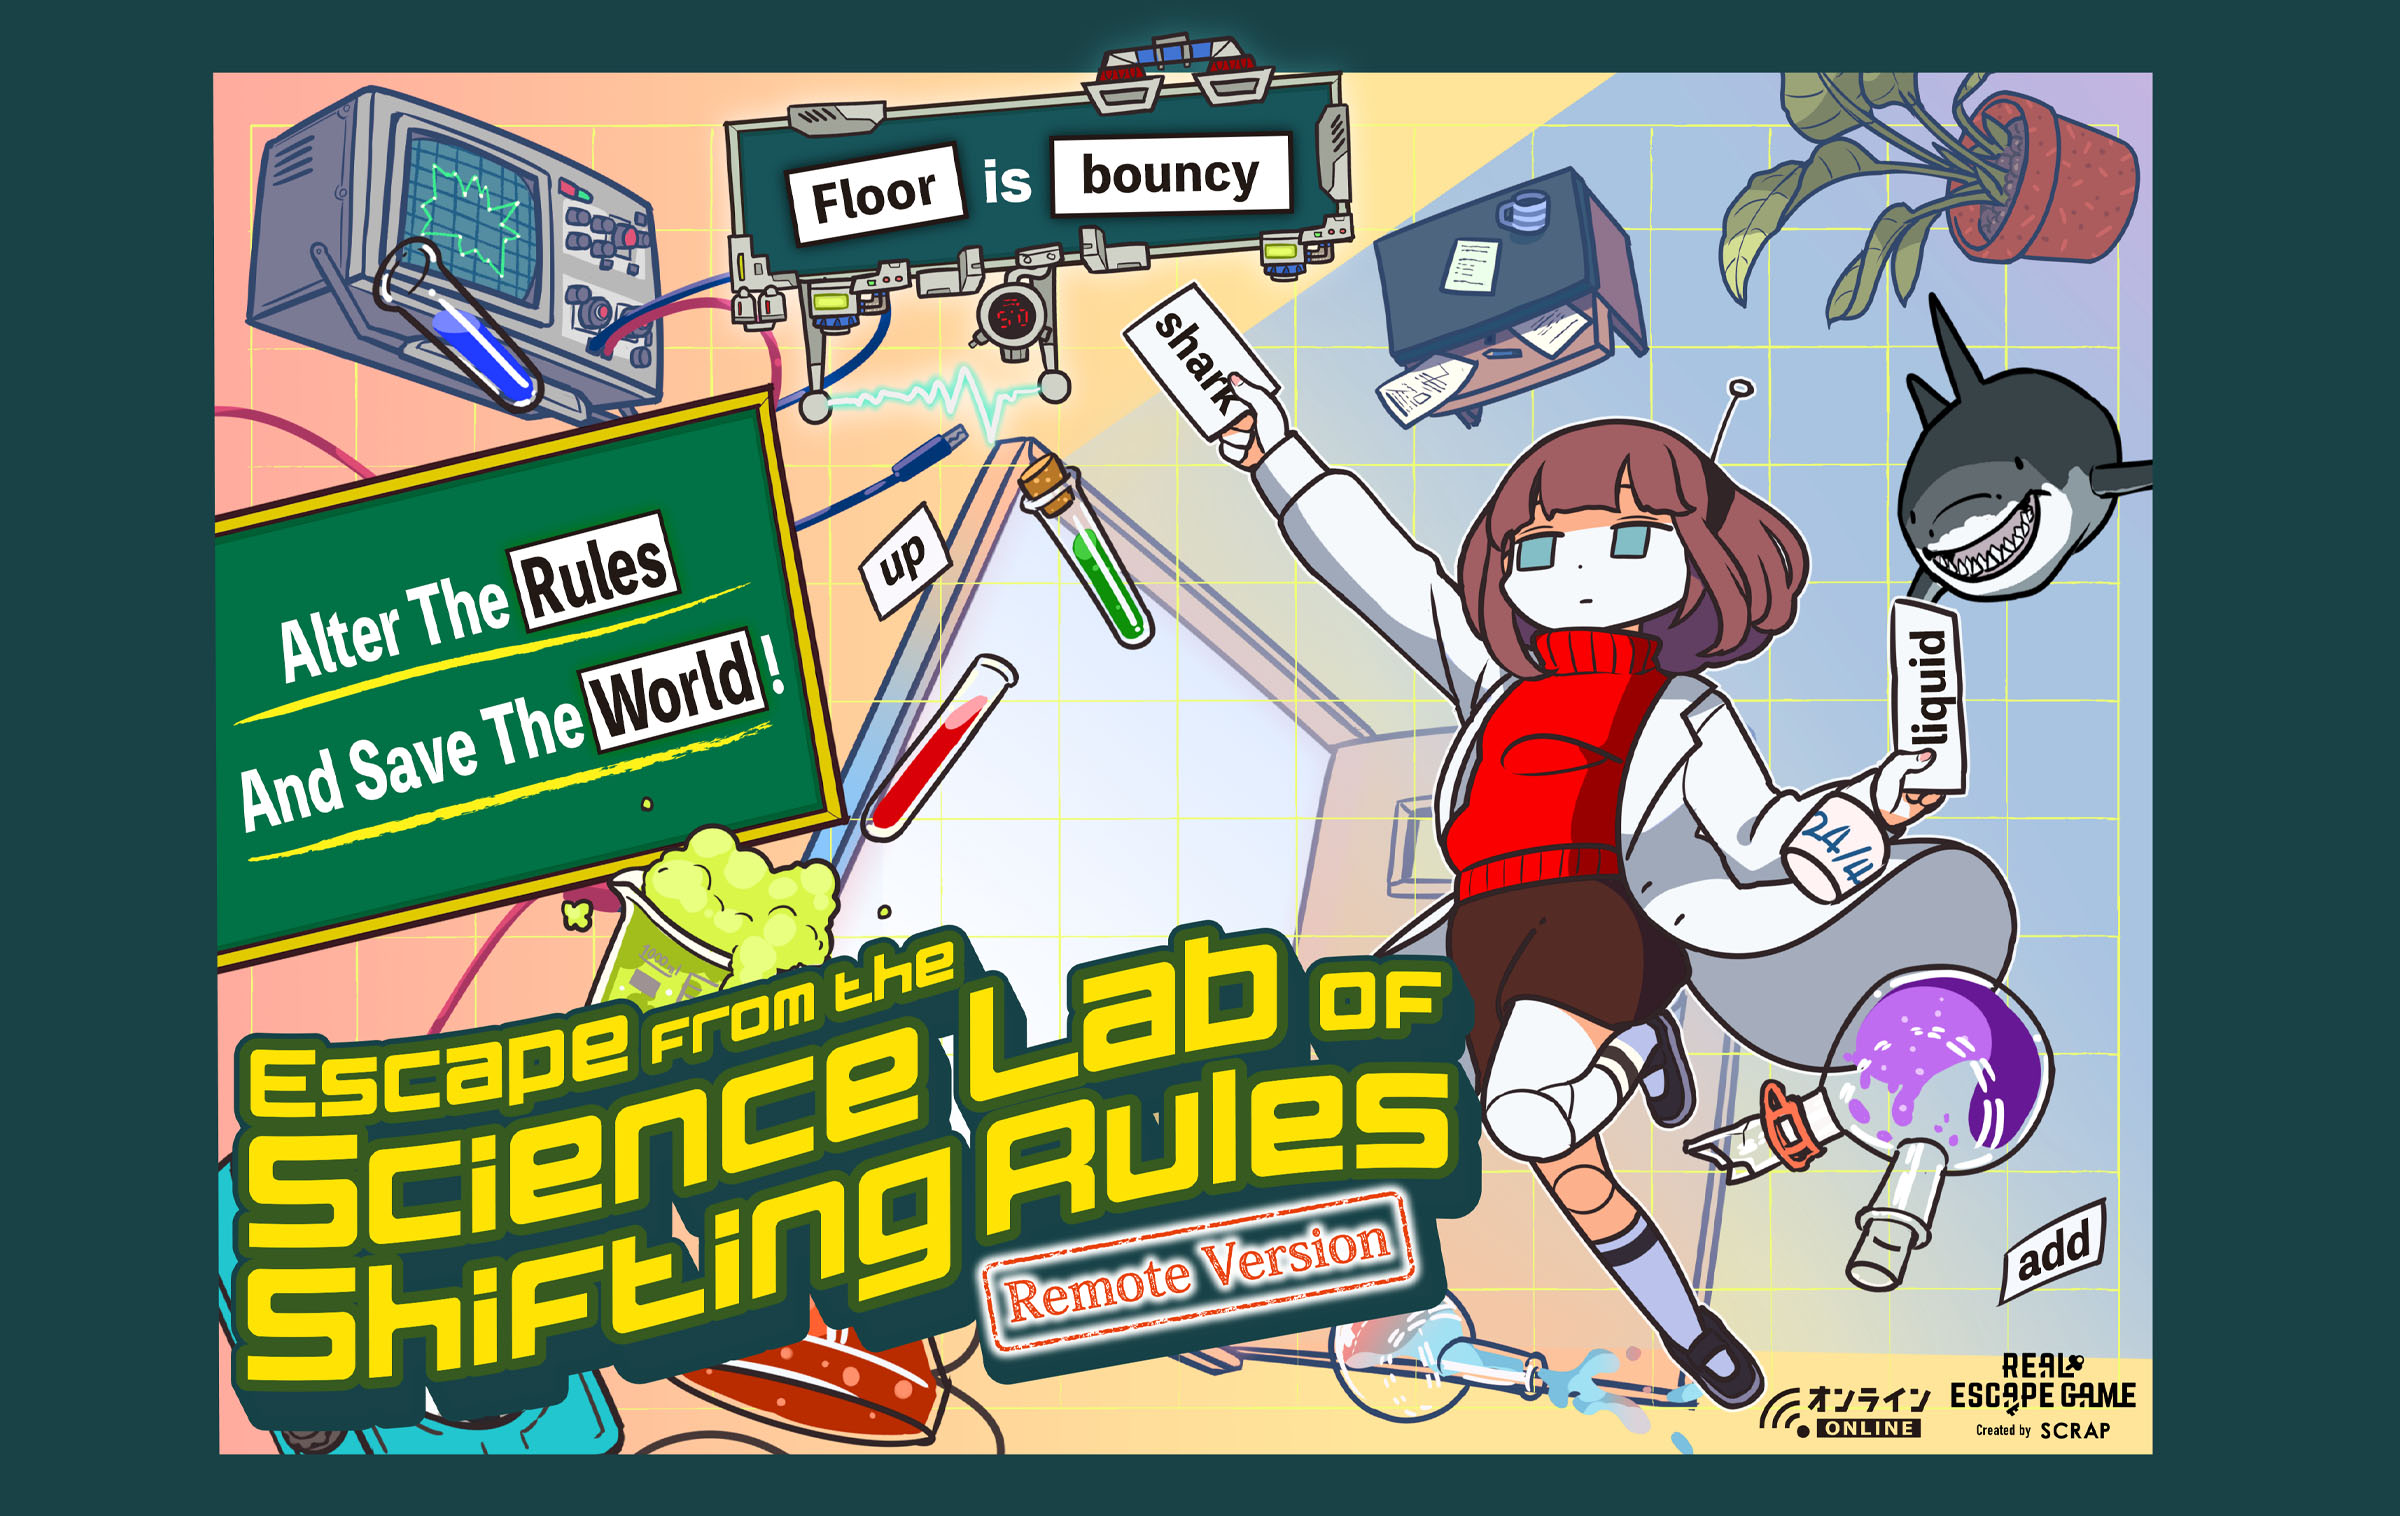 Escape from the Science Lab of shifting rules